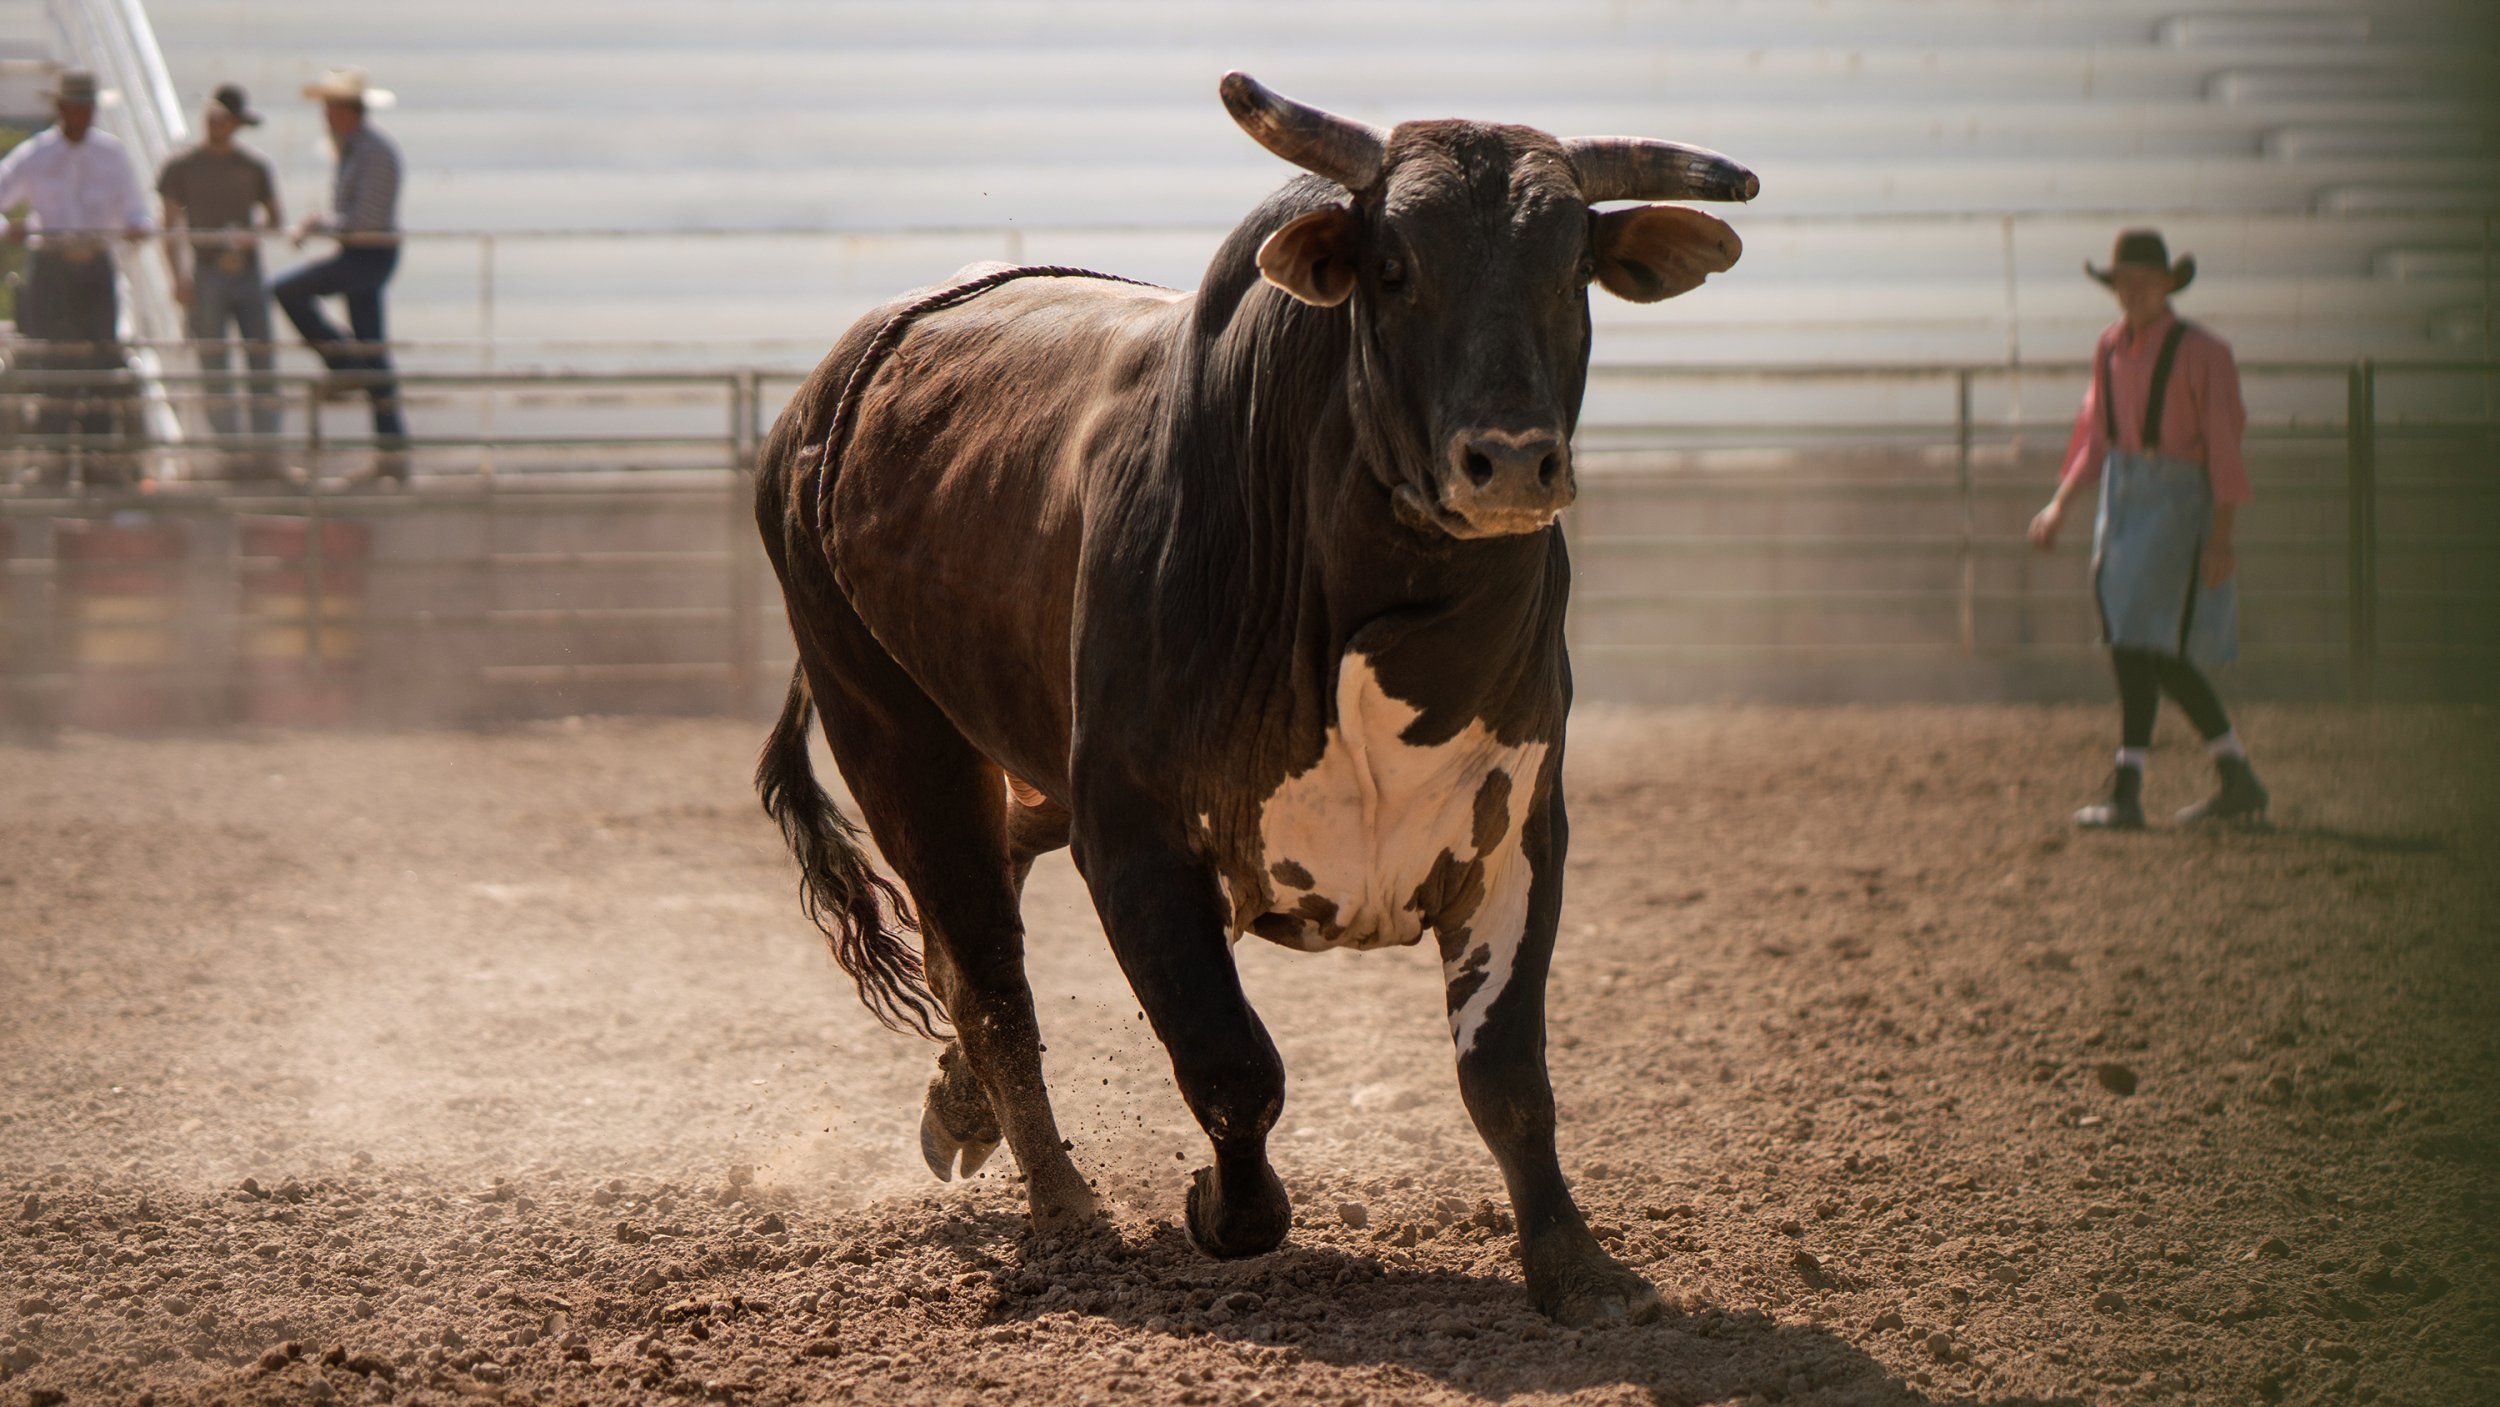 George Mason University Students Urge Ban of Professional Bull Riders After  Video Release - Animal Legal Defense Fund